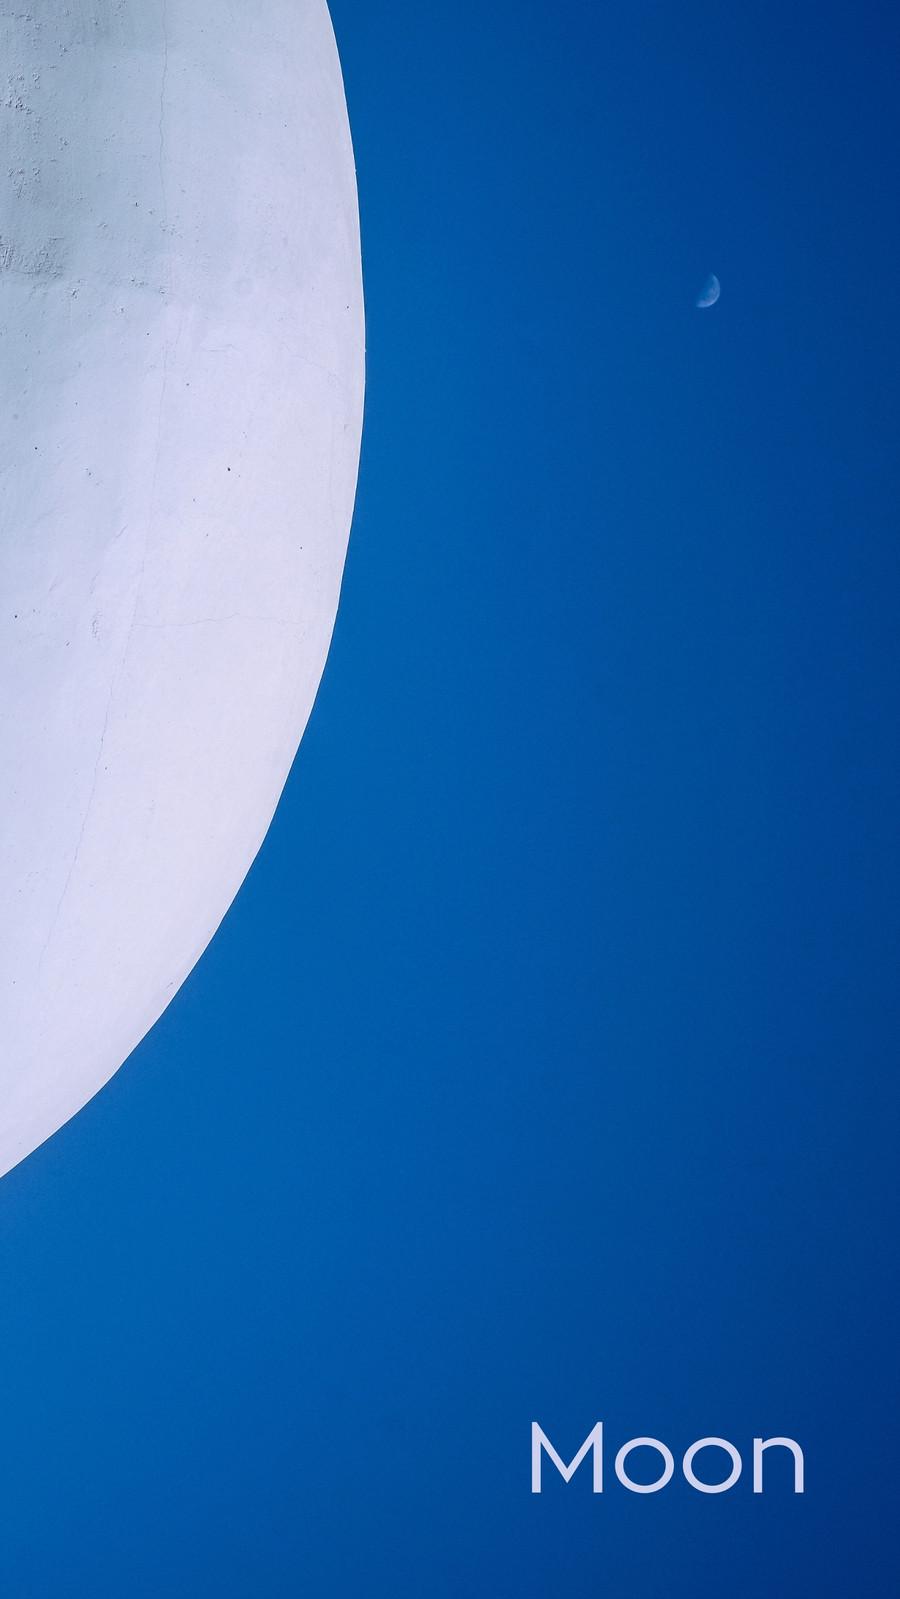 And Customizable Aesthetic Moon Wallpaper Templates